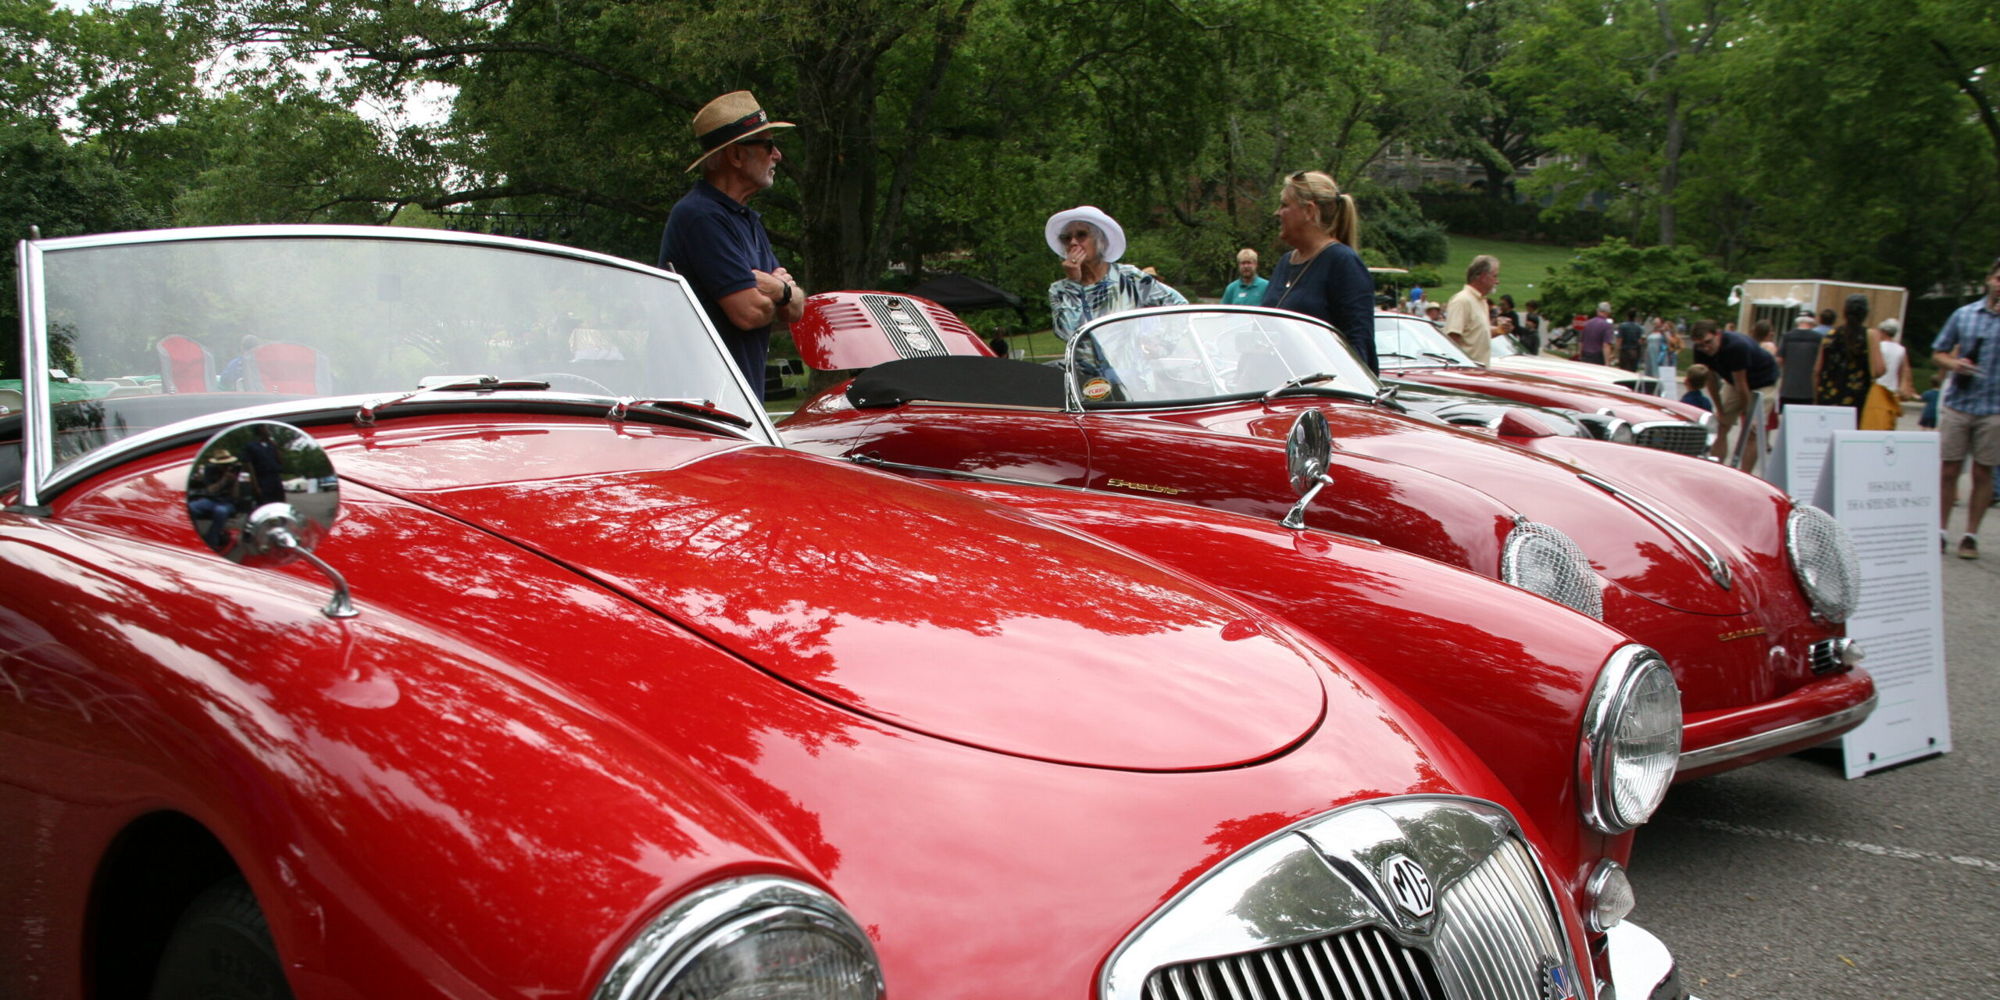 Exposition of Elegance: Classic Cars at Cheekwood promotional image